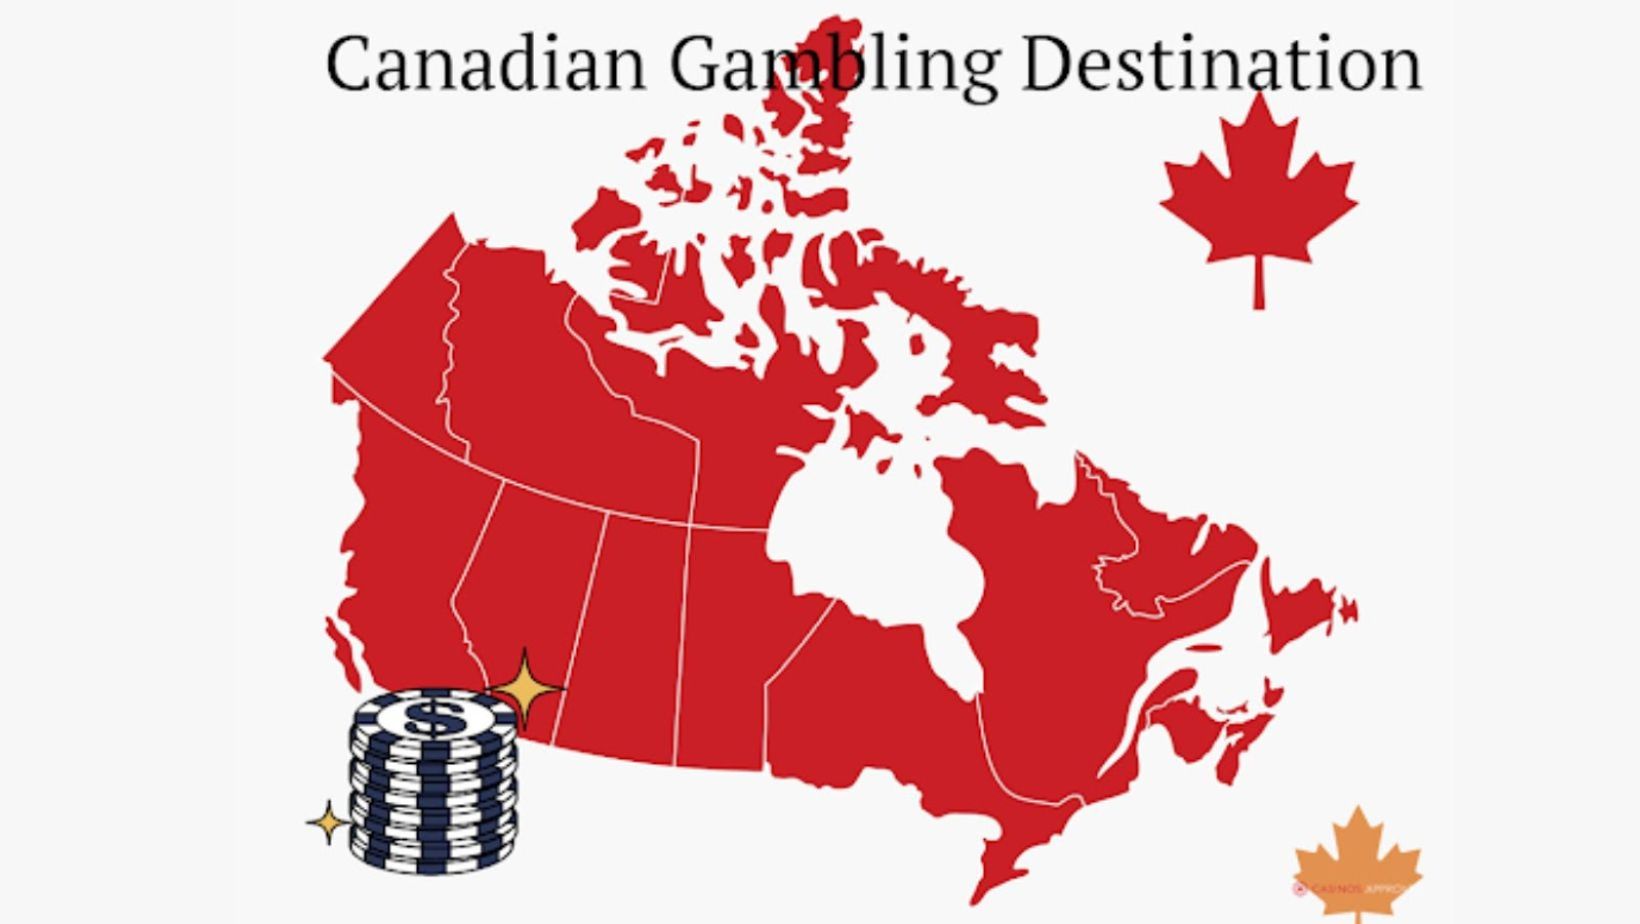 Travel destination in Canada for gambling